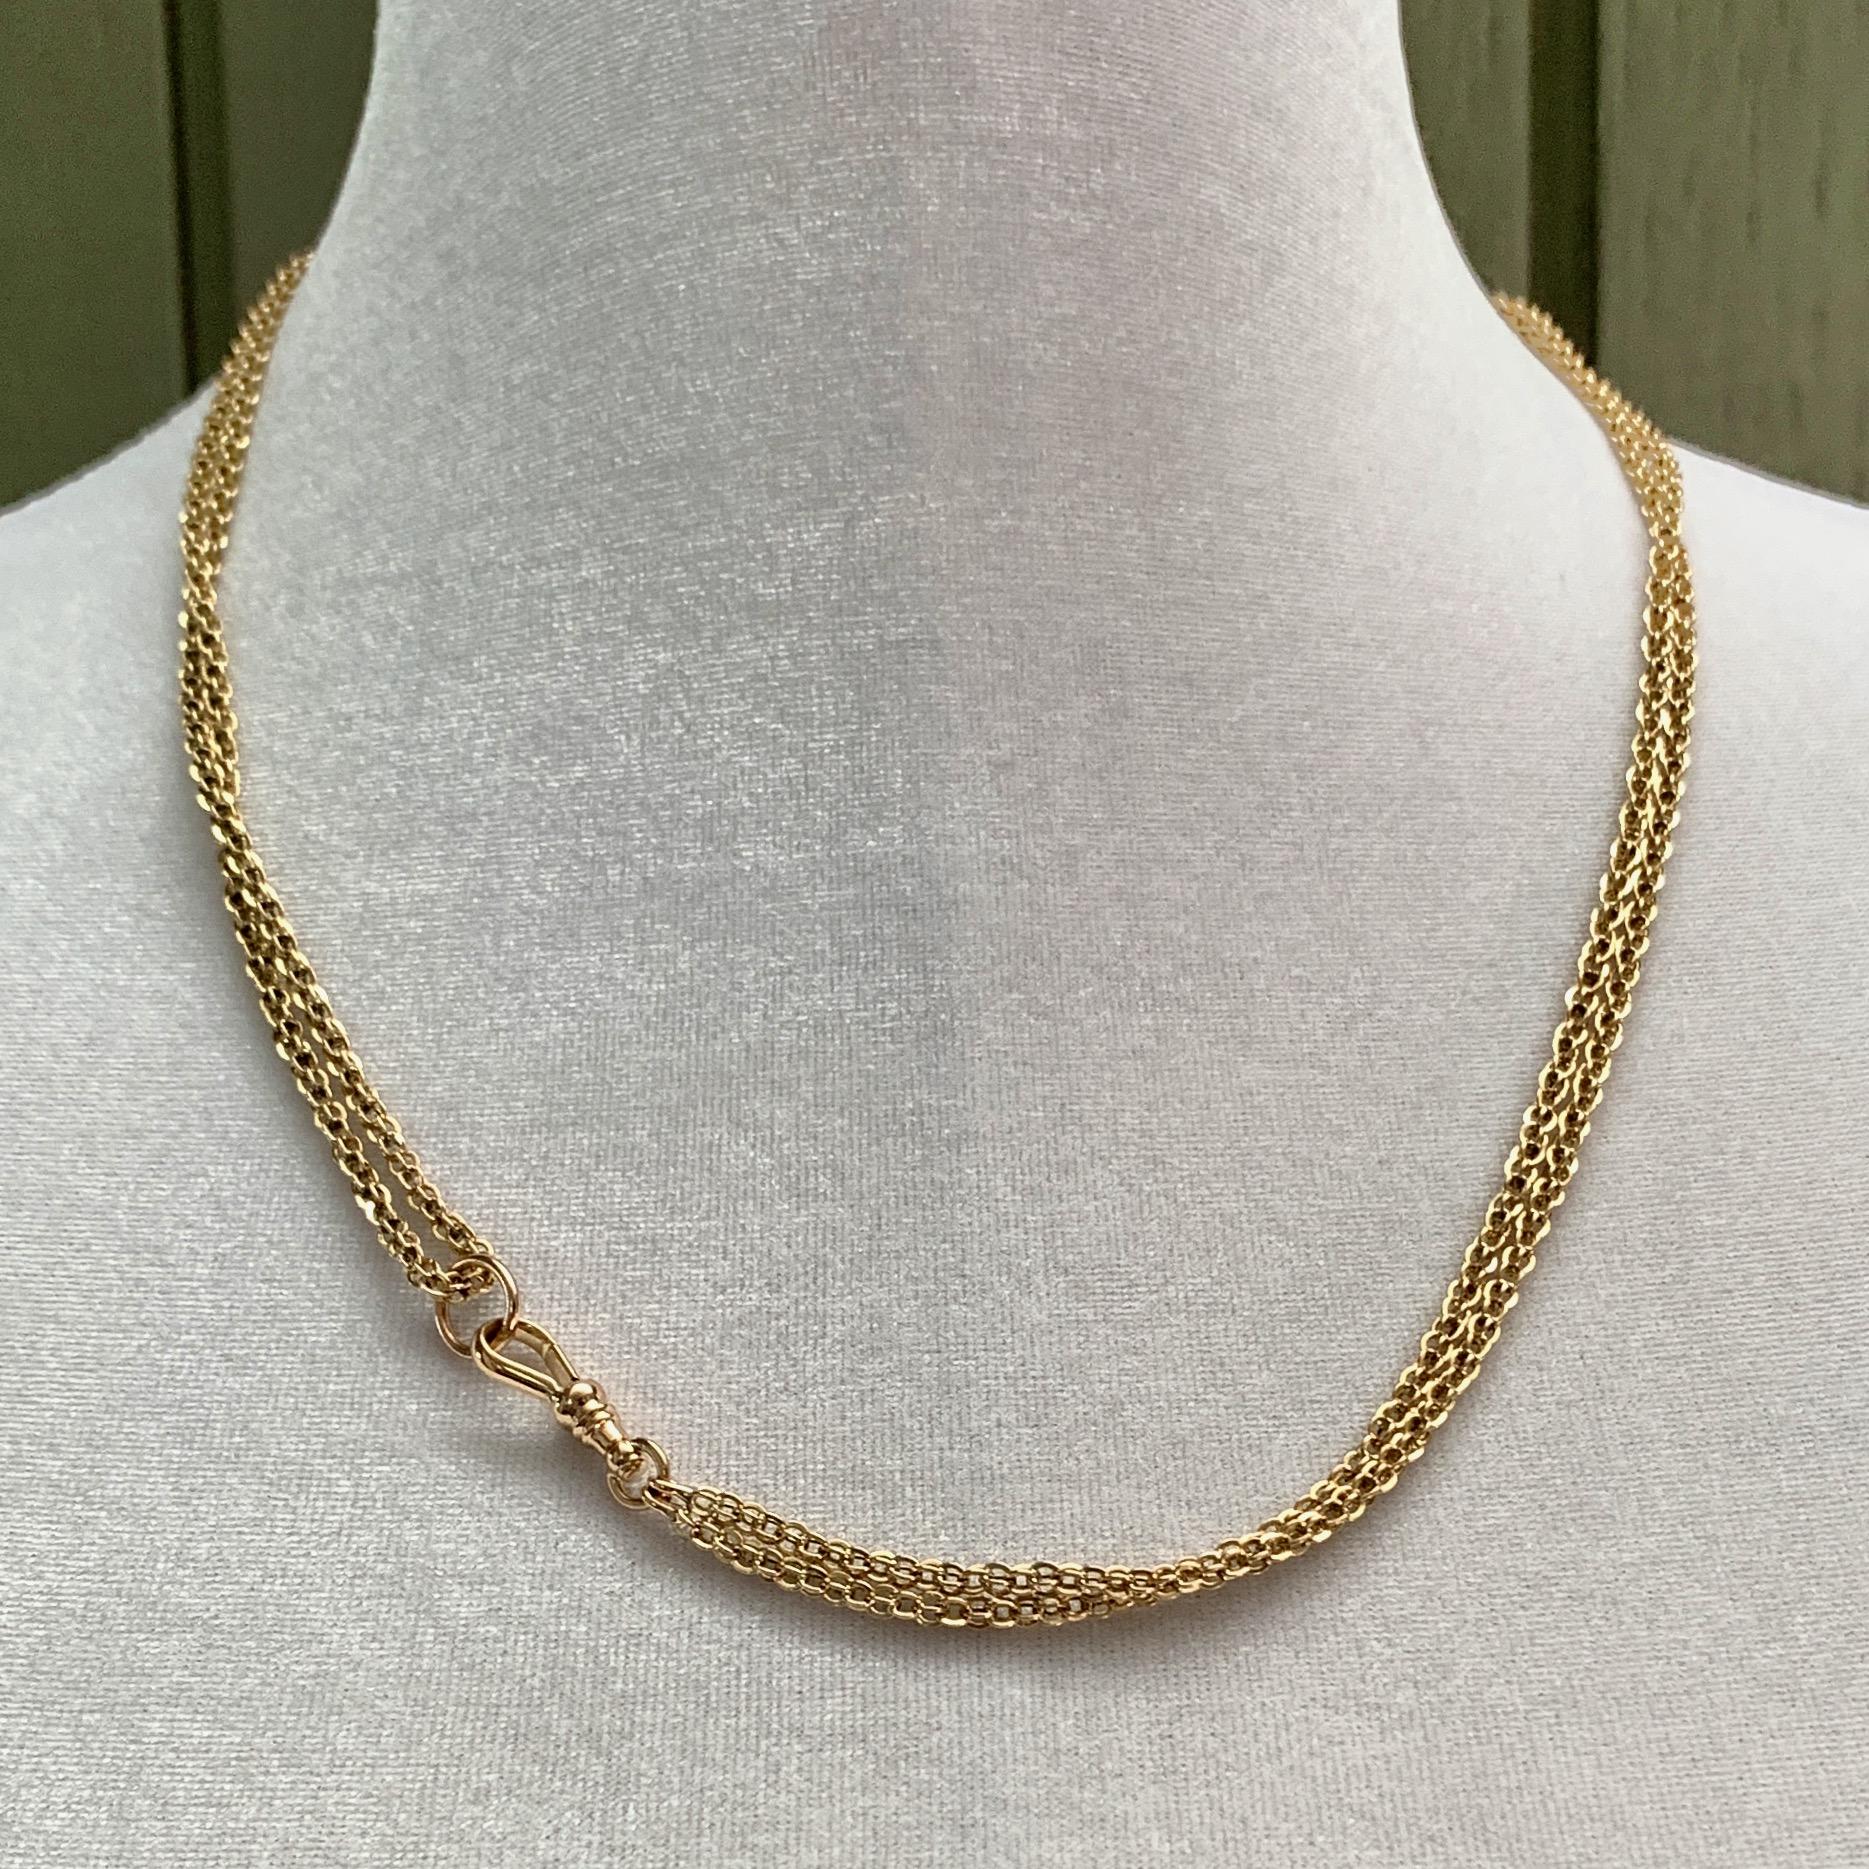 Women's or Men's Long Guard Chain in Yellow Gold with Cage Links and Rose Gold Swivel Clip